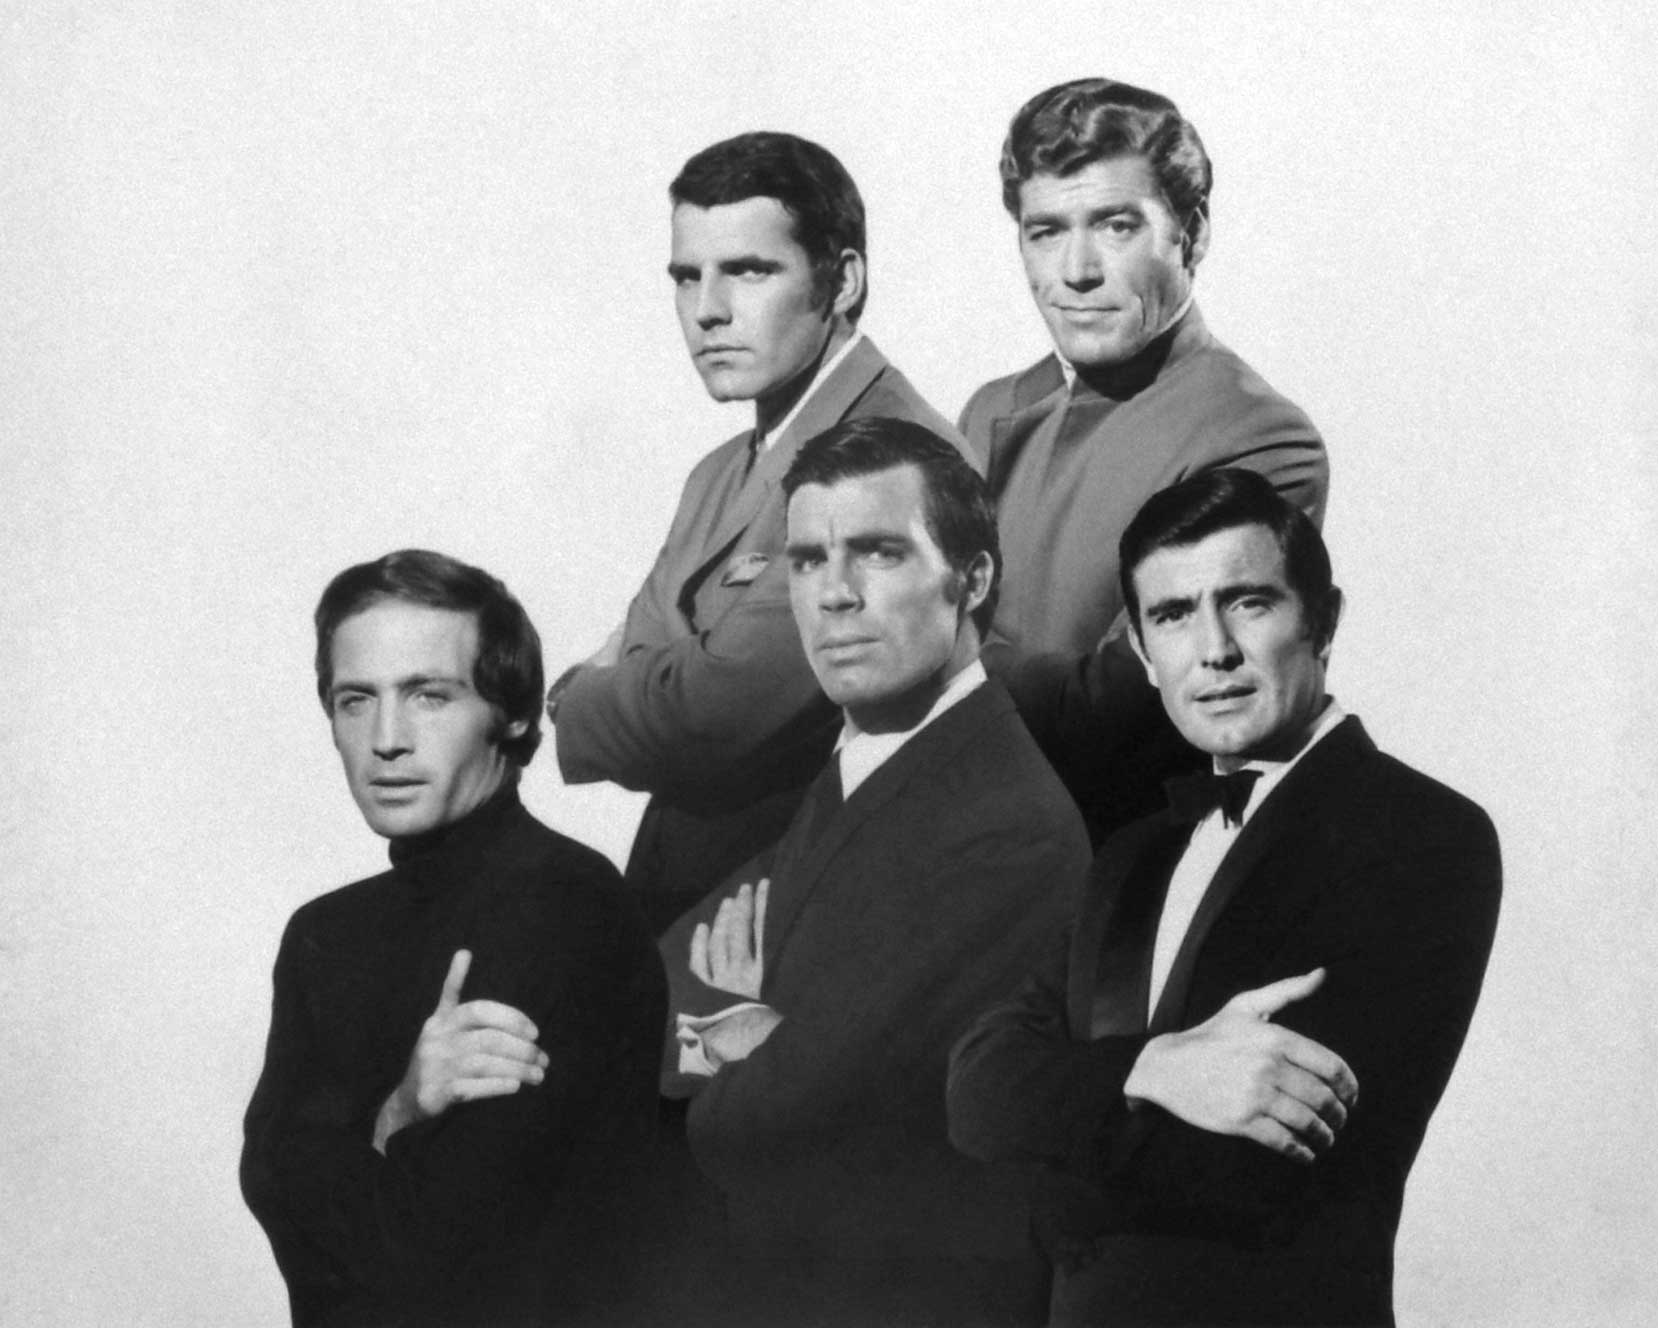 A composite image of the five top candidates (including ultimate choice George Lazenby, bottom right). Published in the October 11, 1968, issue of LIFE.